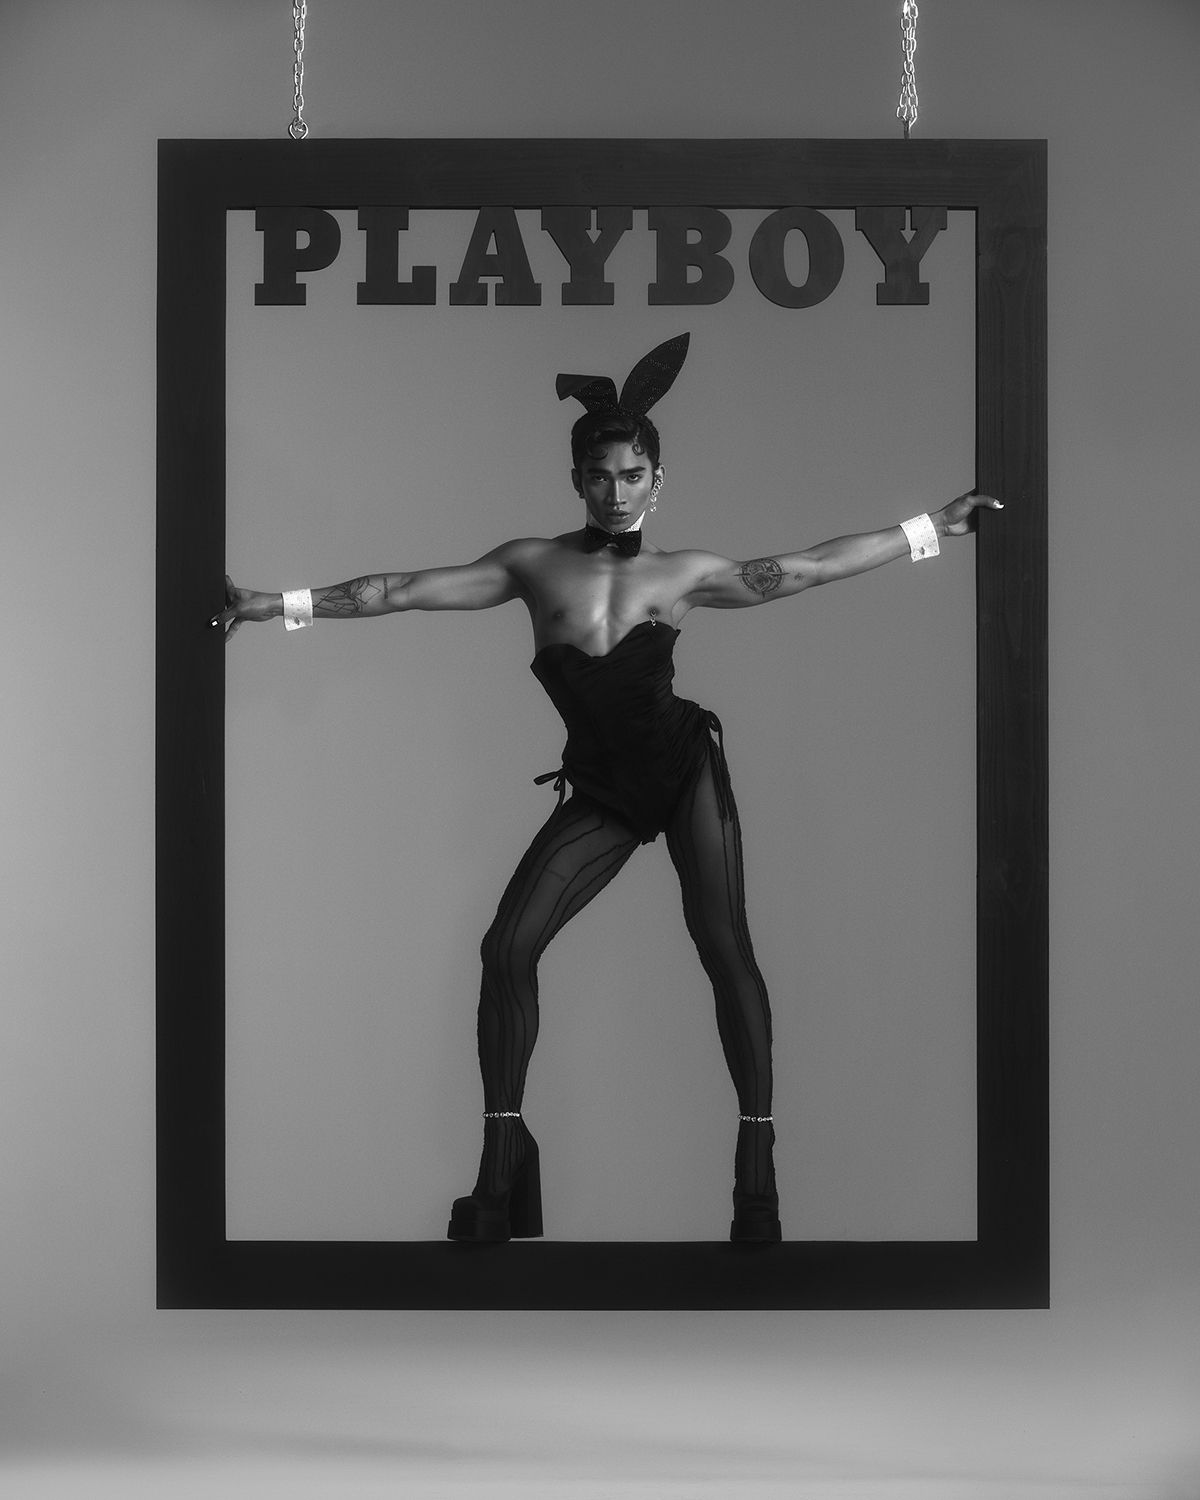 beau barrett recommends the man playboy show pic